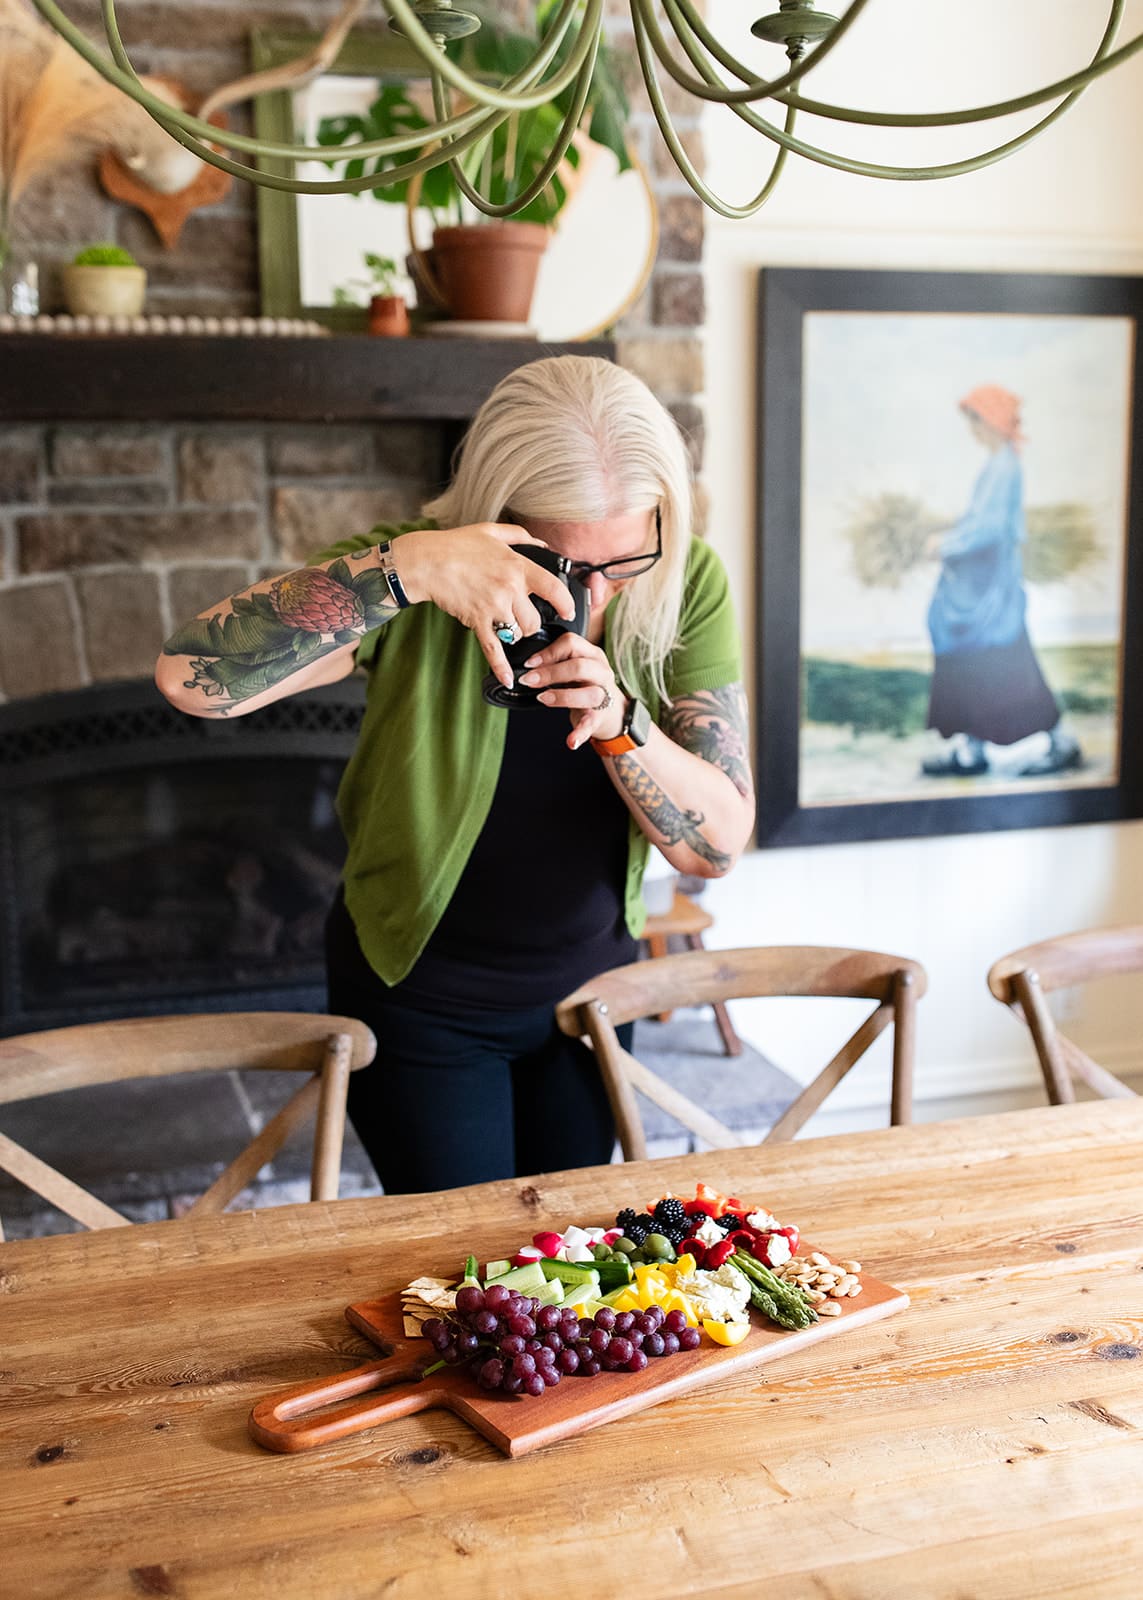 Kristina is standing over a table, pointing her camera at a colorful snack board of fruit, veggies, crackers, nuts, and vegan cheeses.